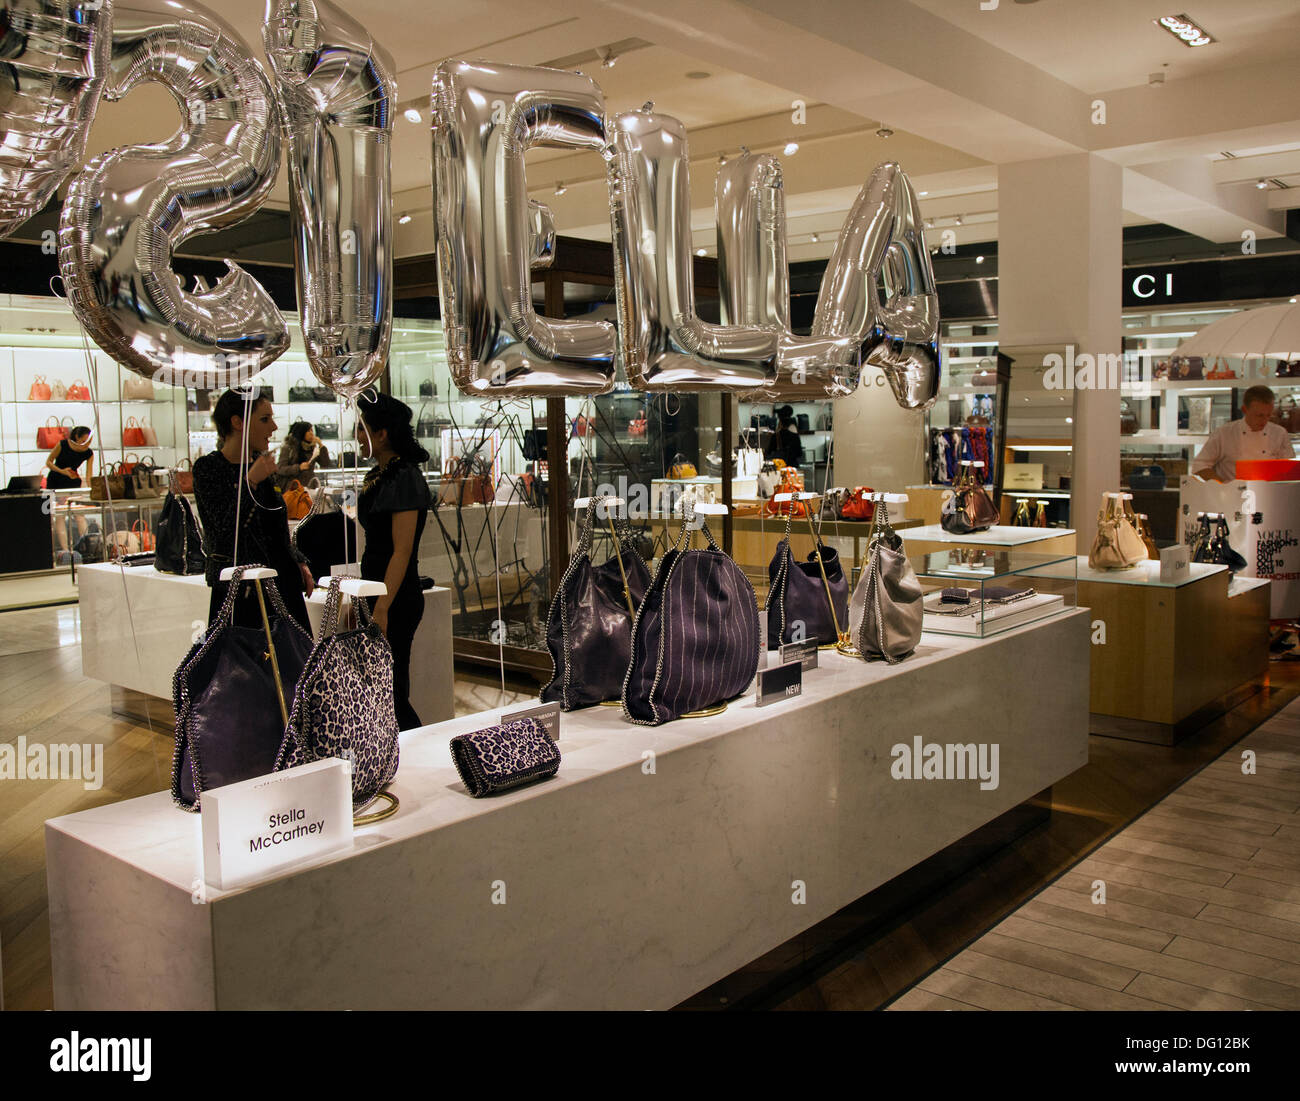 Stella mccartney handbags hi-res stock photography and images - Alamy